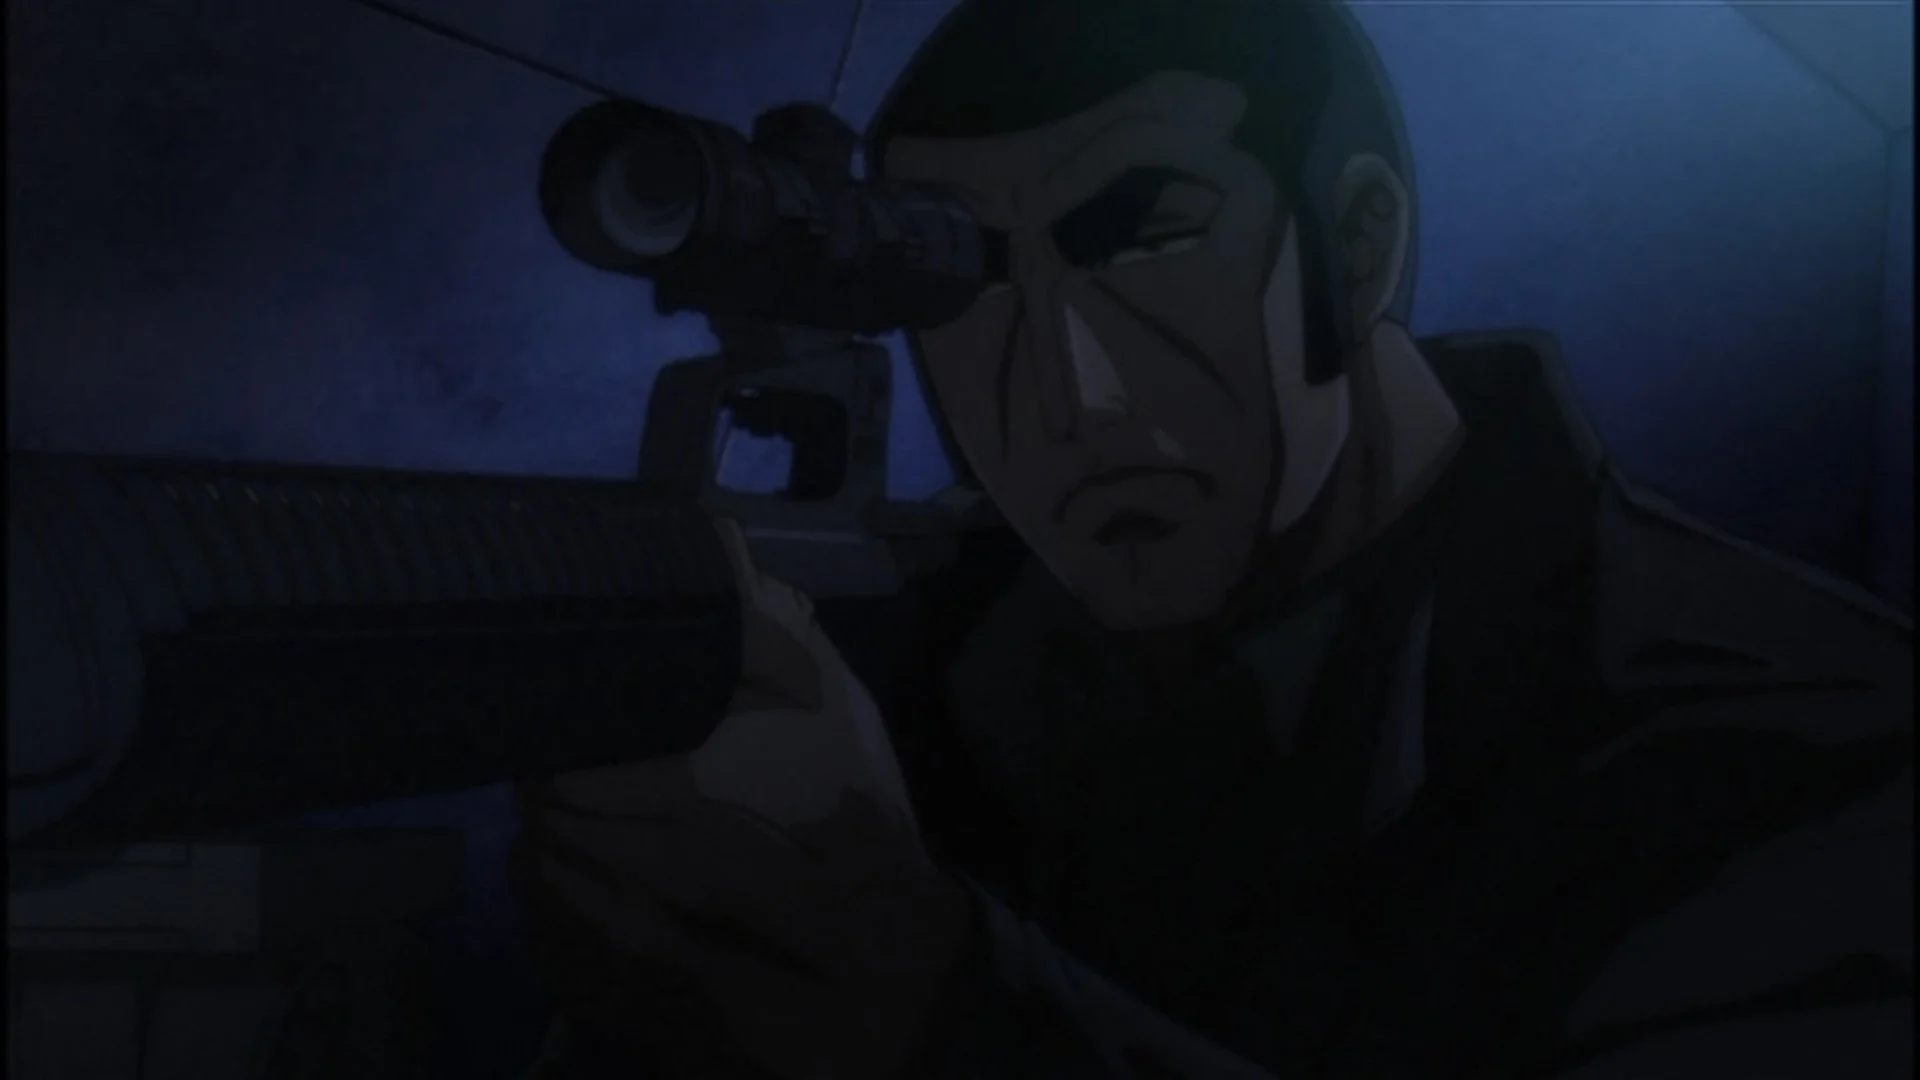 Golgo 13 is an animated series written by Takao Saito.